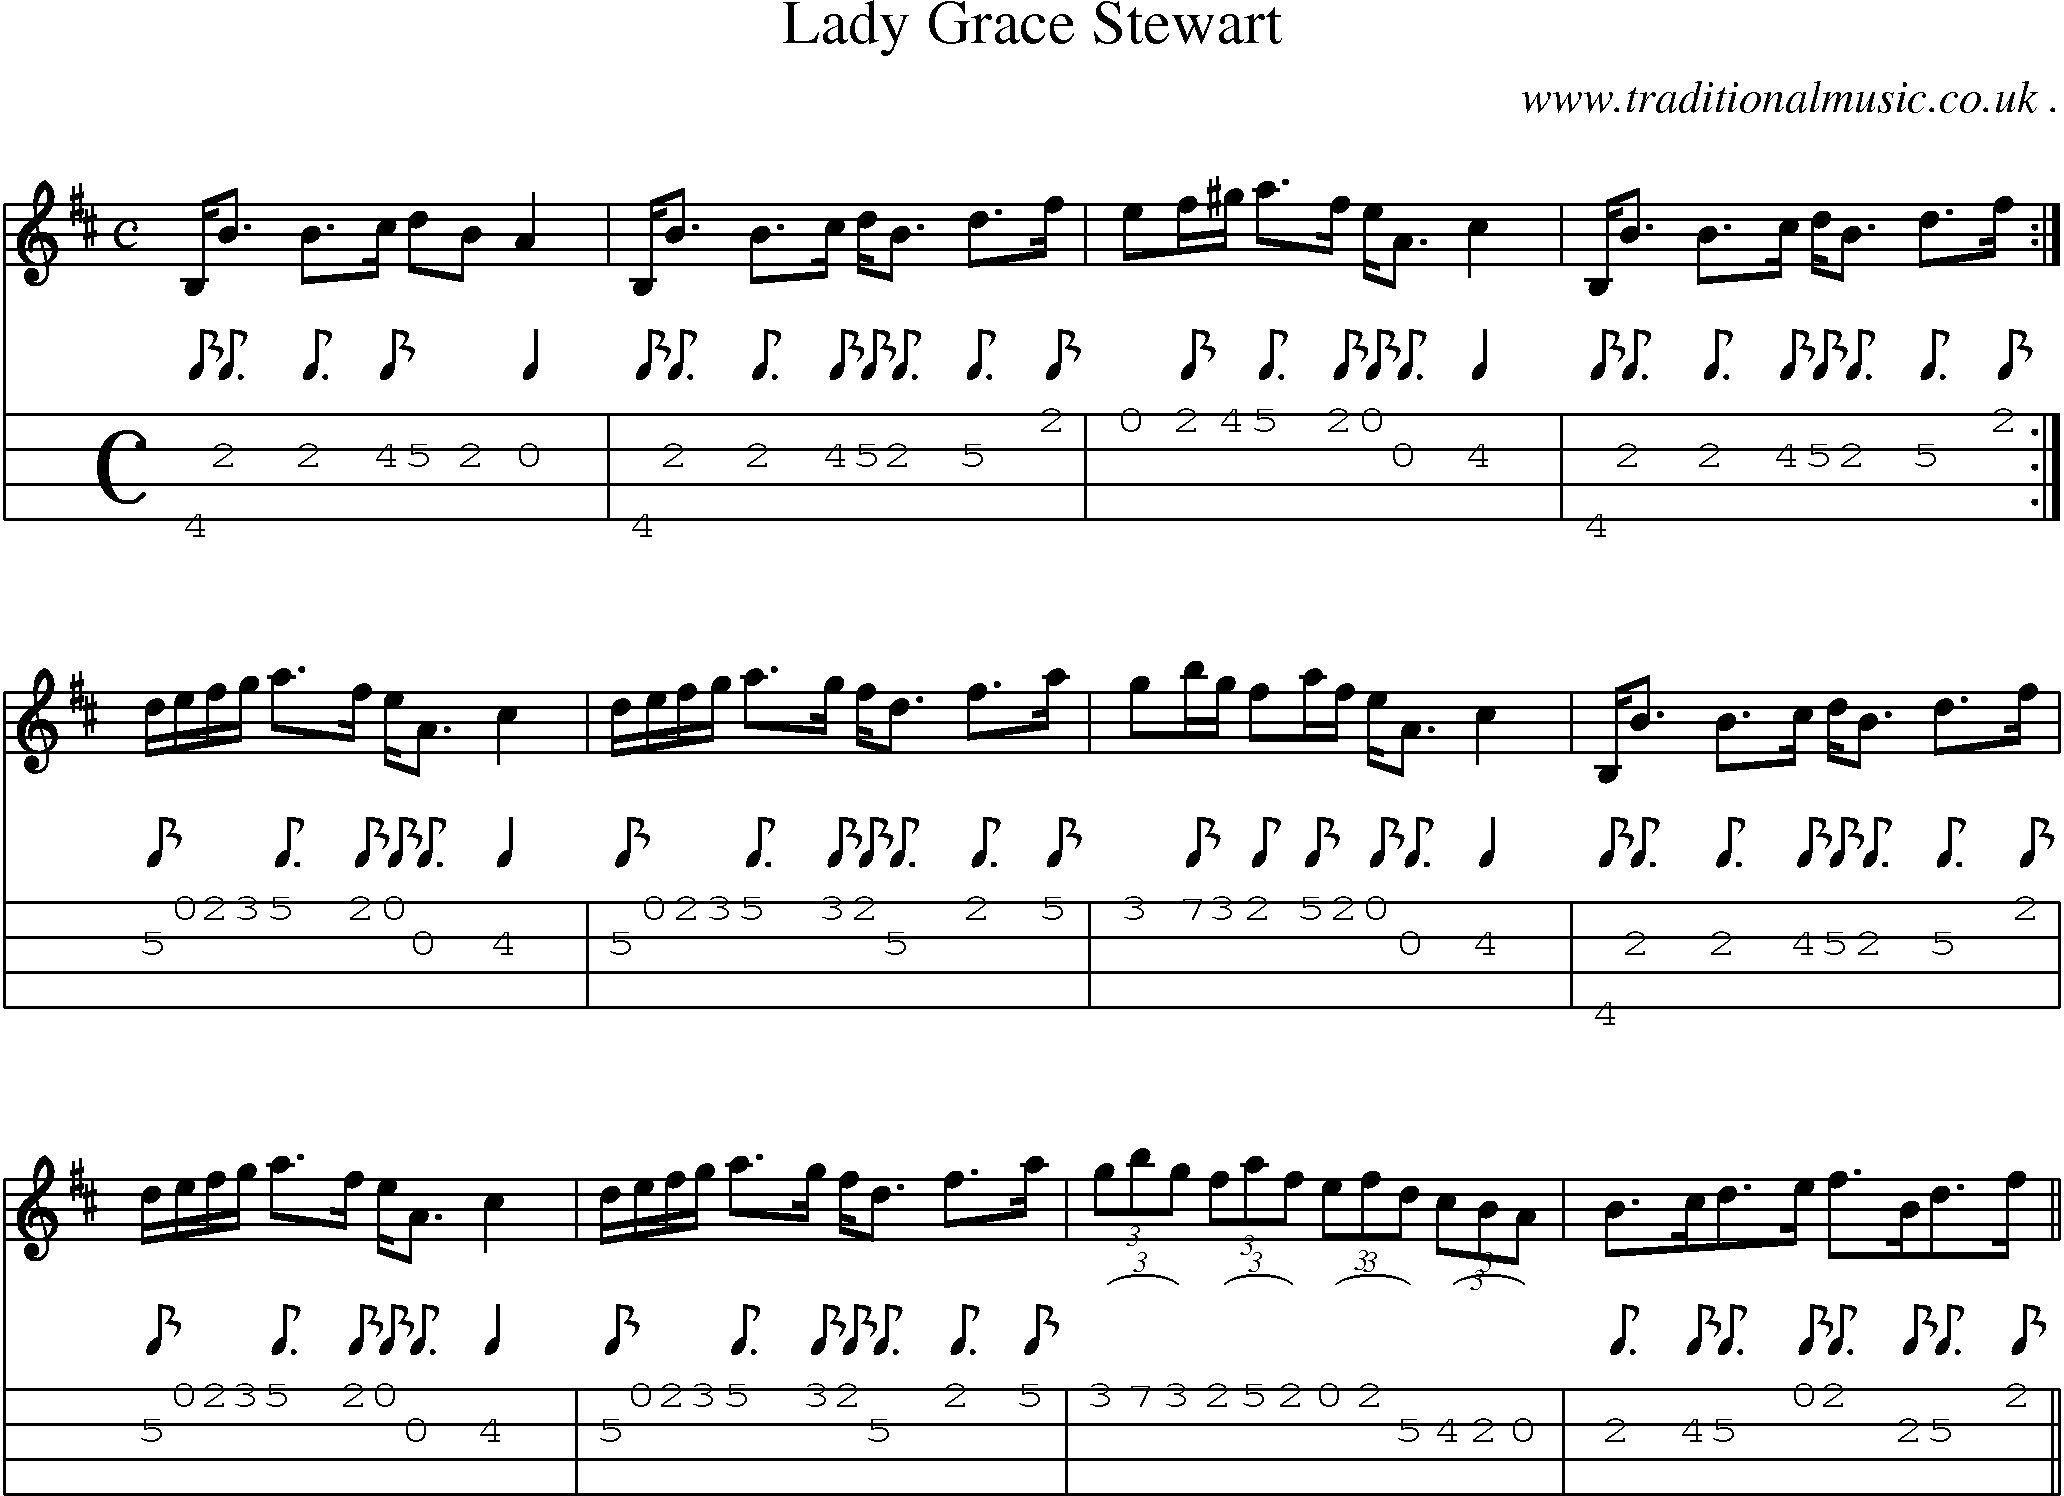 Sheet-music  score, Chords and Mandolin Tabs for Lady Grace Stewart